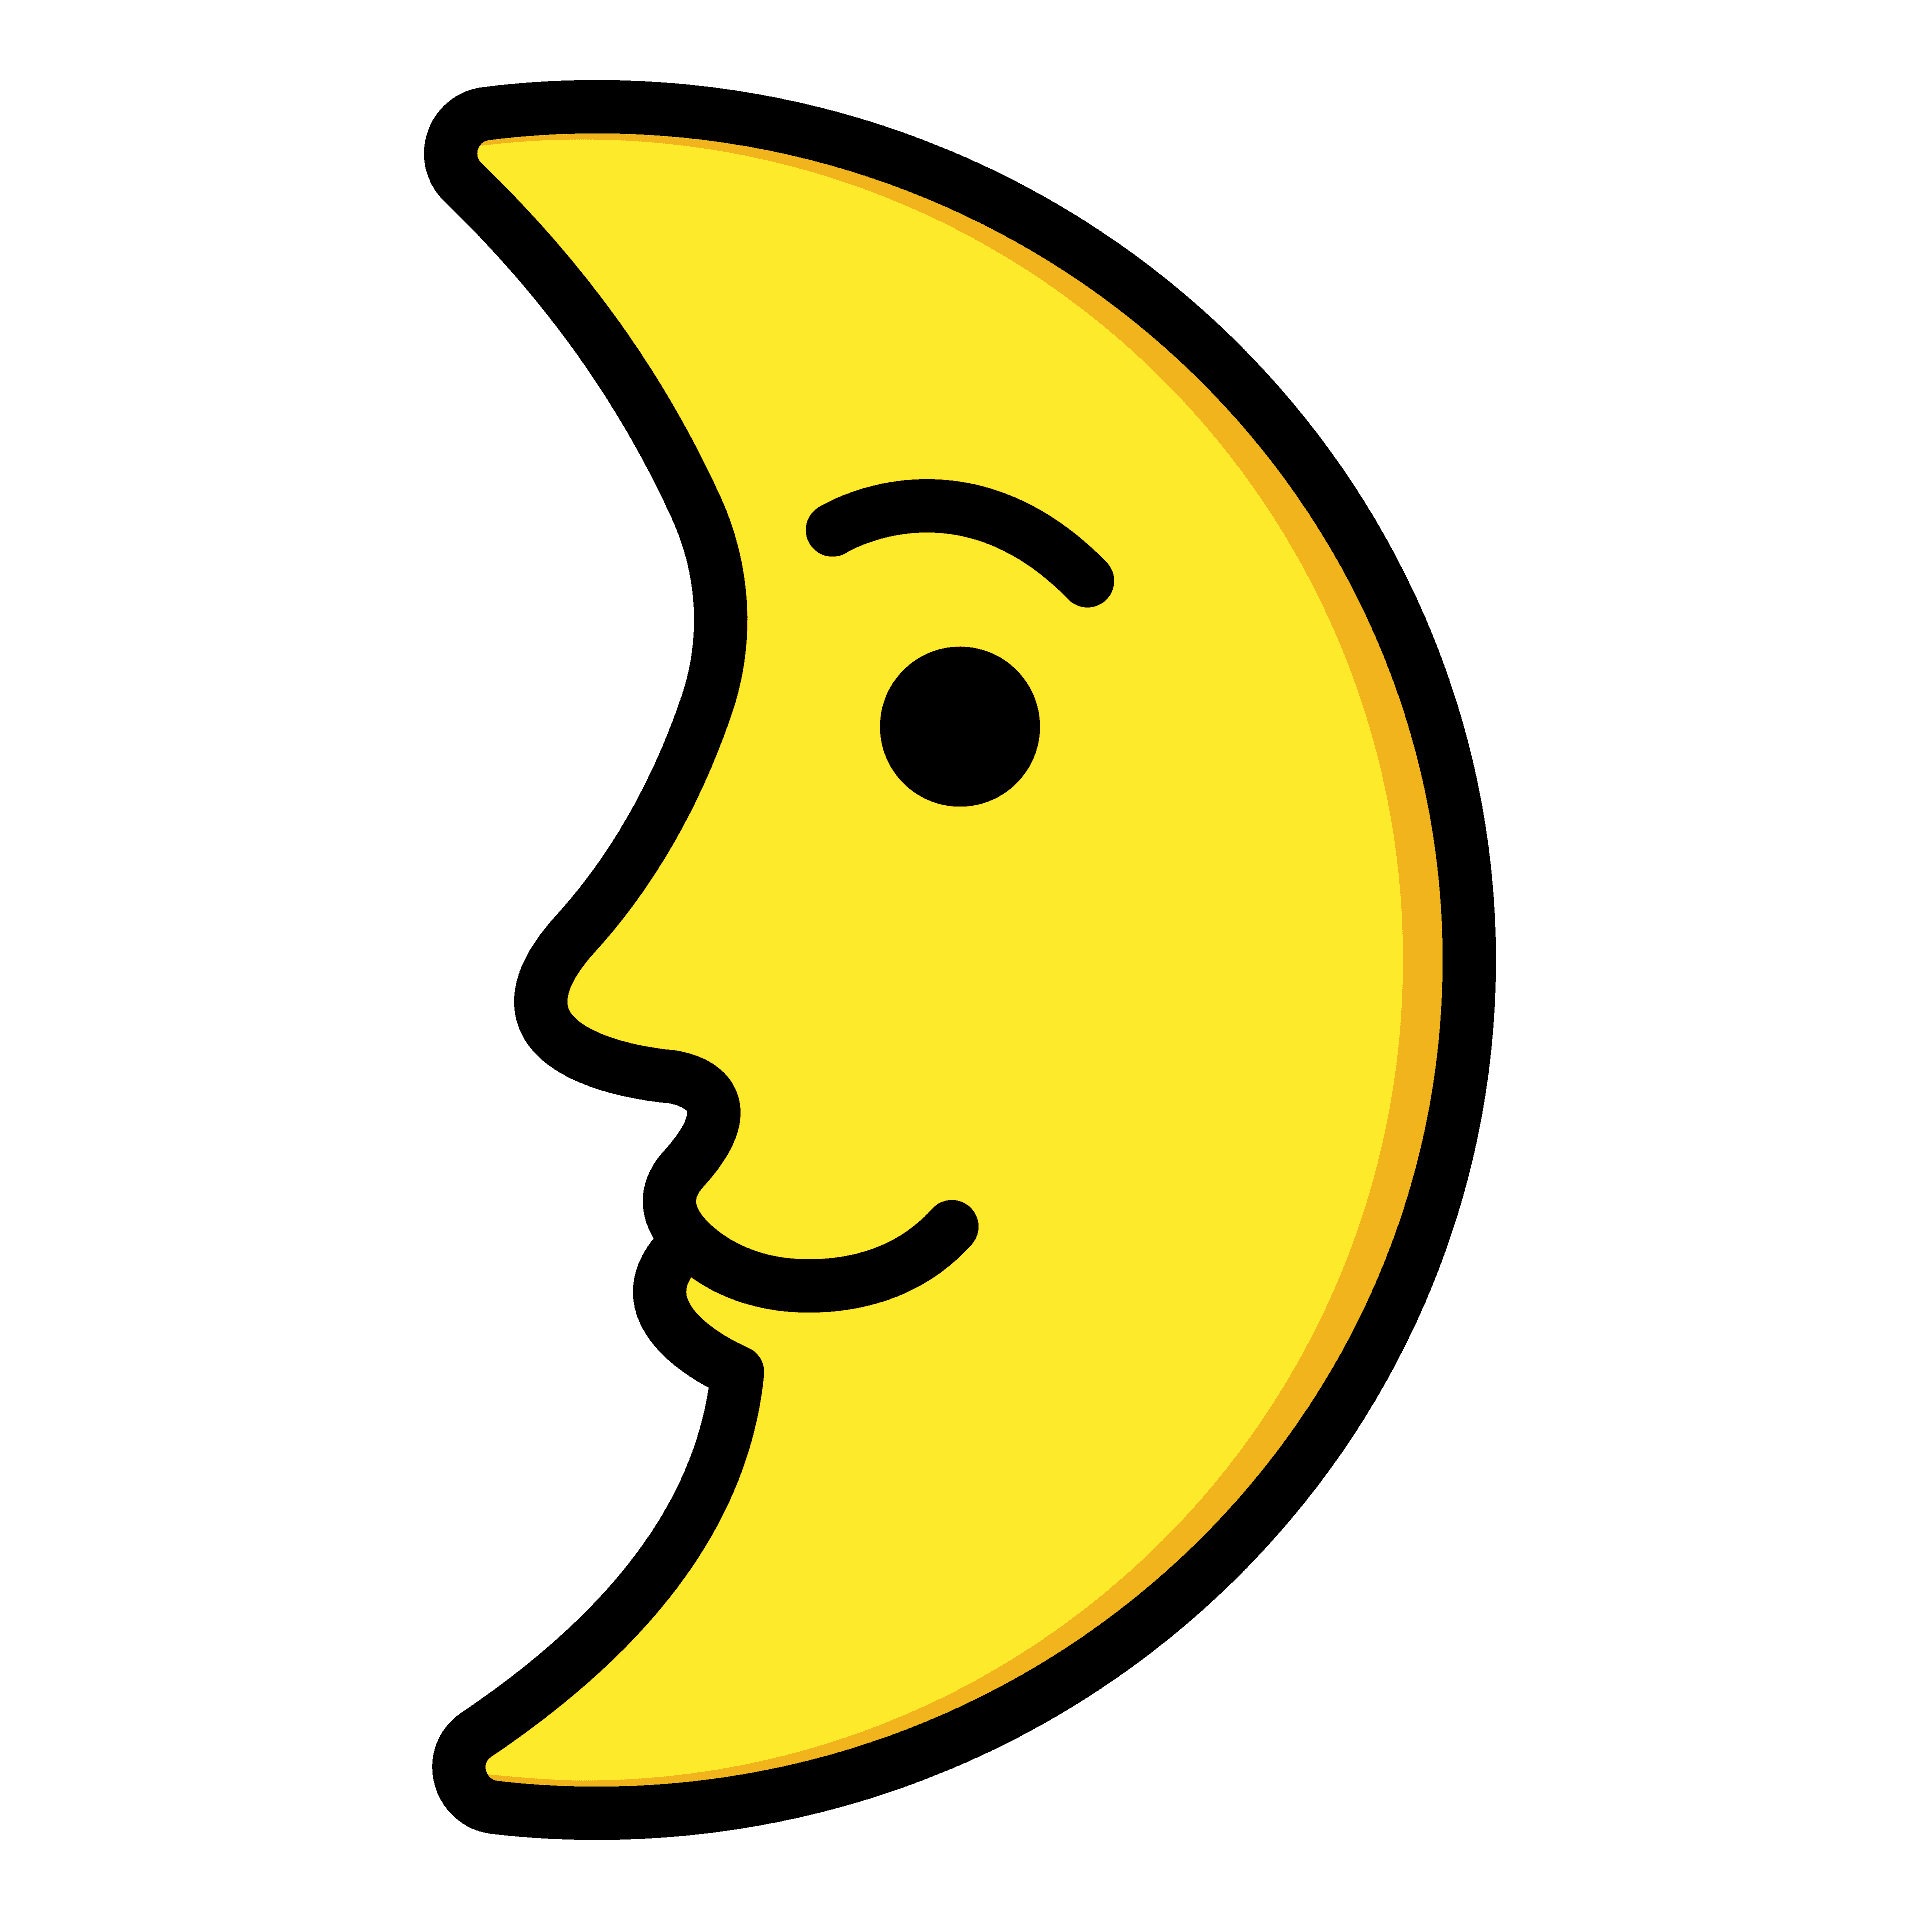 thin crescent moon png - Clip Art Library - Clip Art Library